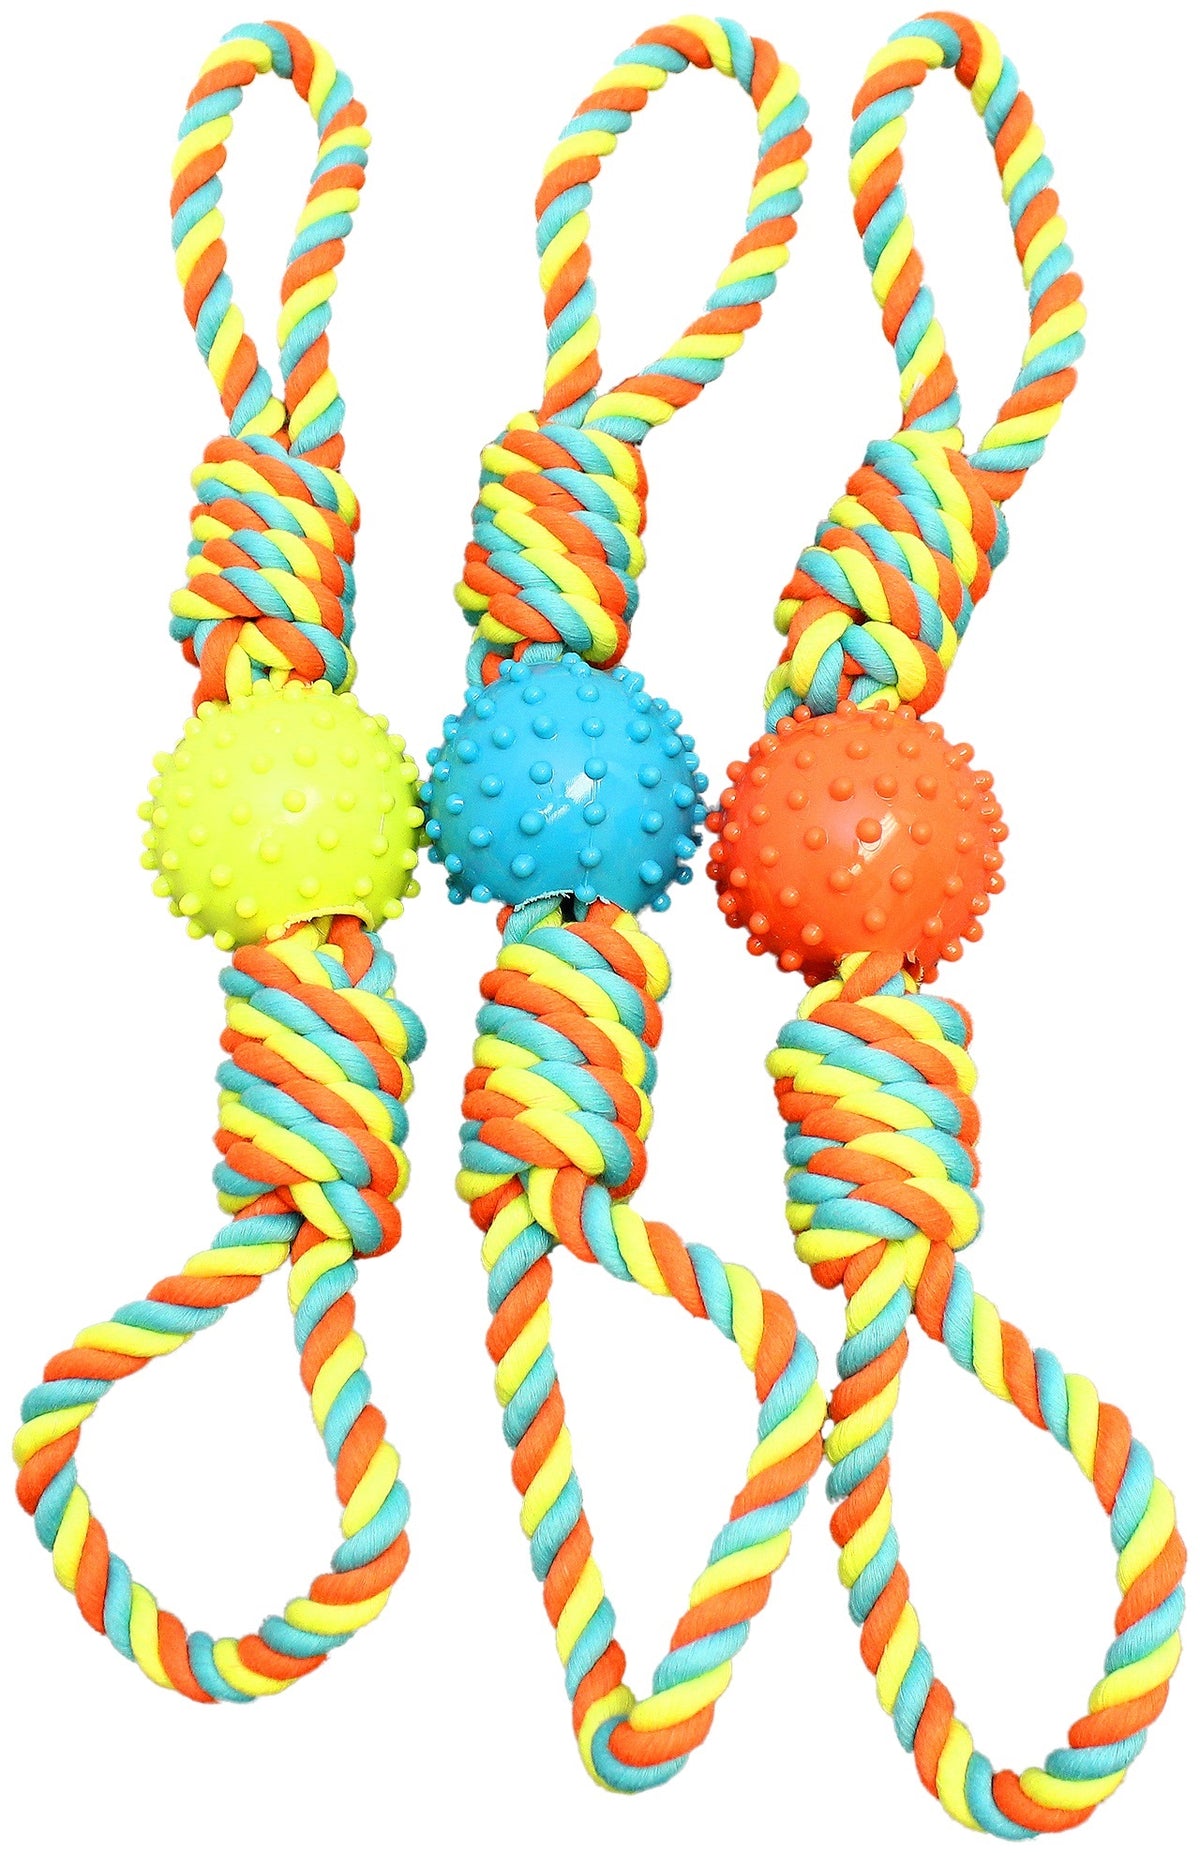 Chomper WB15533 Rope Bone With TPR Spiked Ball Dog Toy, Assorted Colors